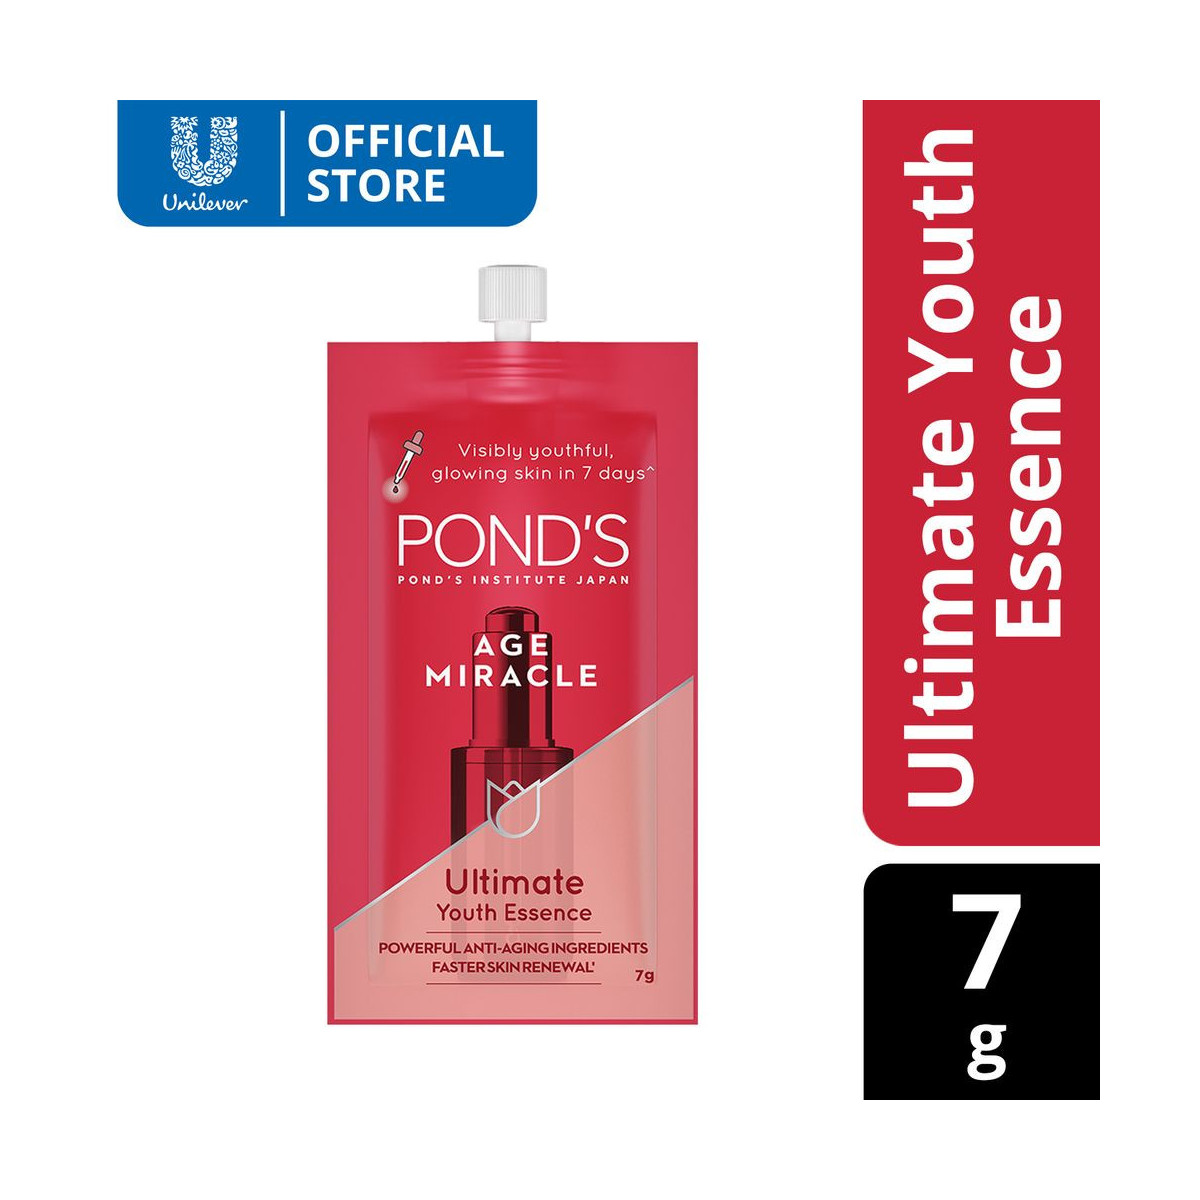 Pond's Age Miracle Ultimate Youth Essence 7g